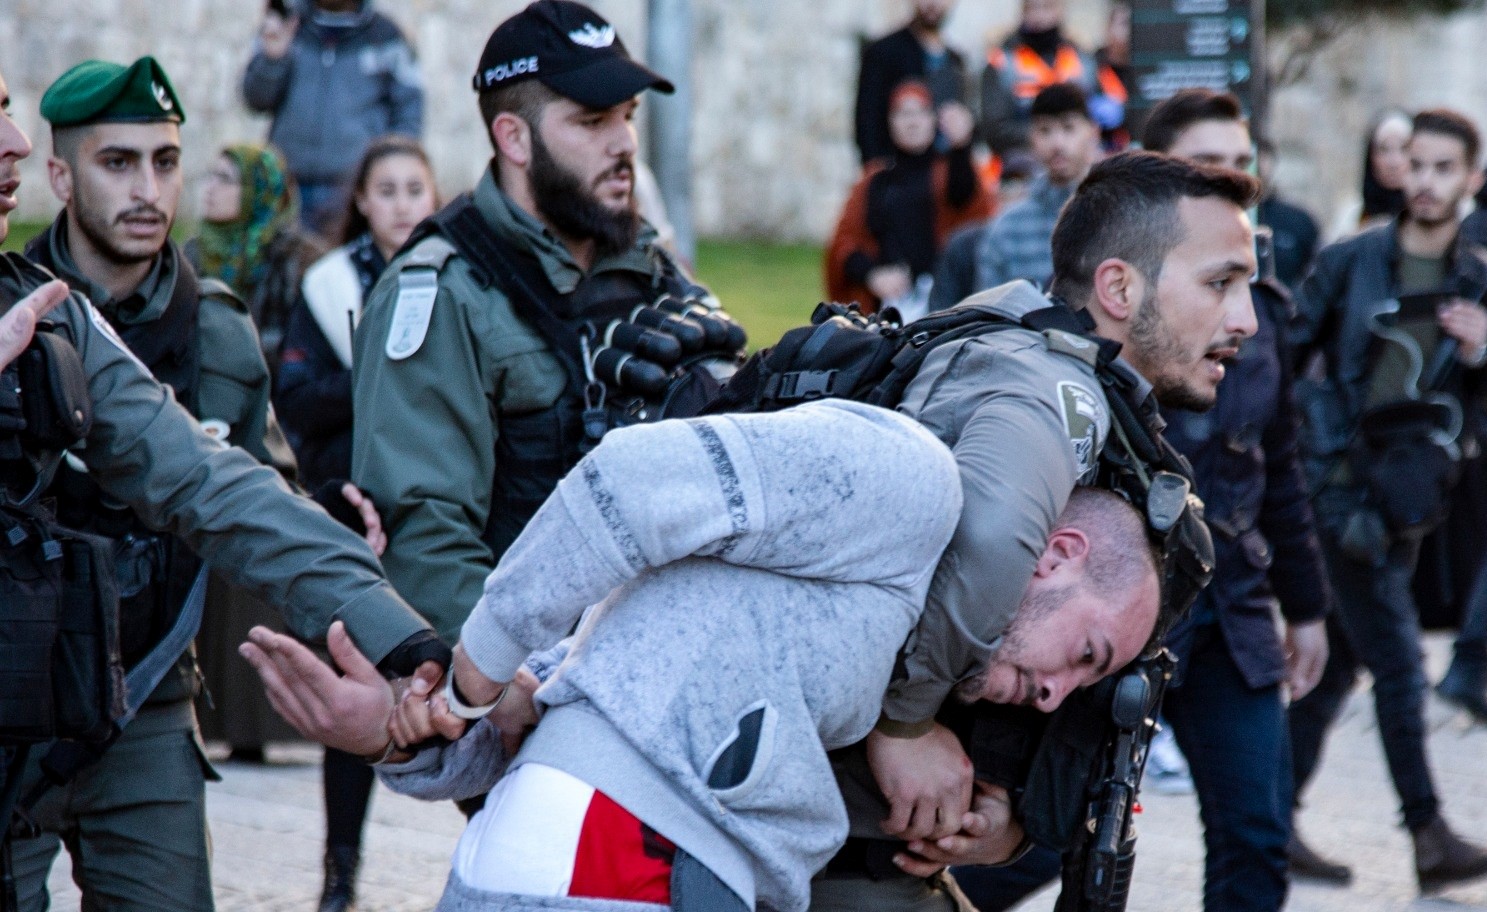 Israeli police forces suppress a protestor demonstrating against the Trump administration’s plan, Jerusalem, January 29, 2020. Clashes have been taking place in the West Bank since the US announced its so-called "Deal of the Century" on January 28.